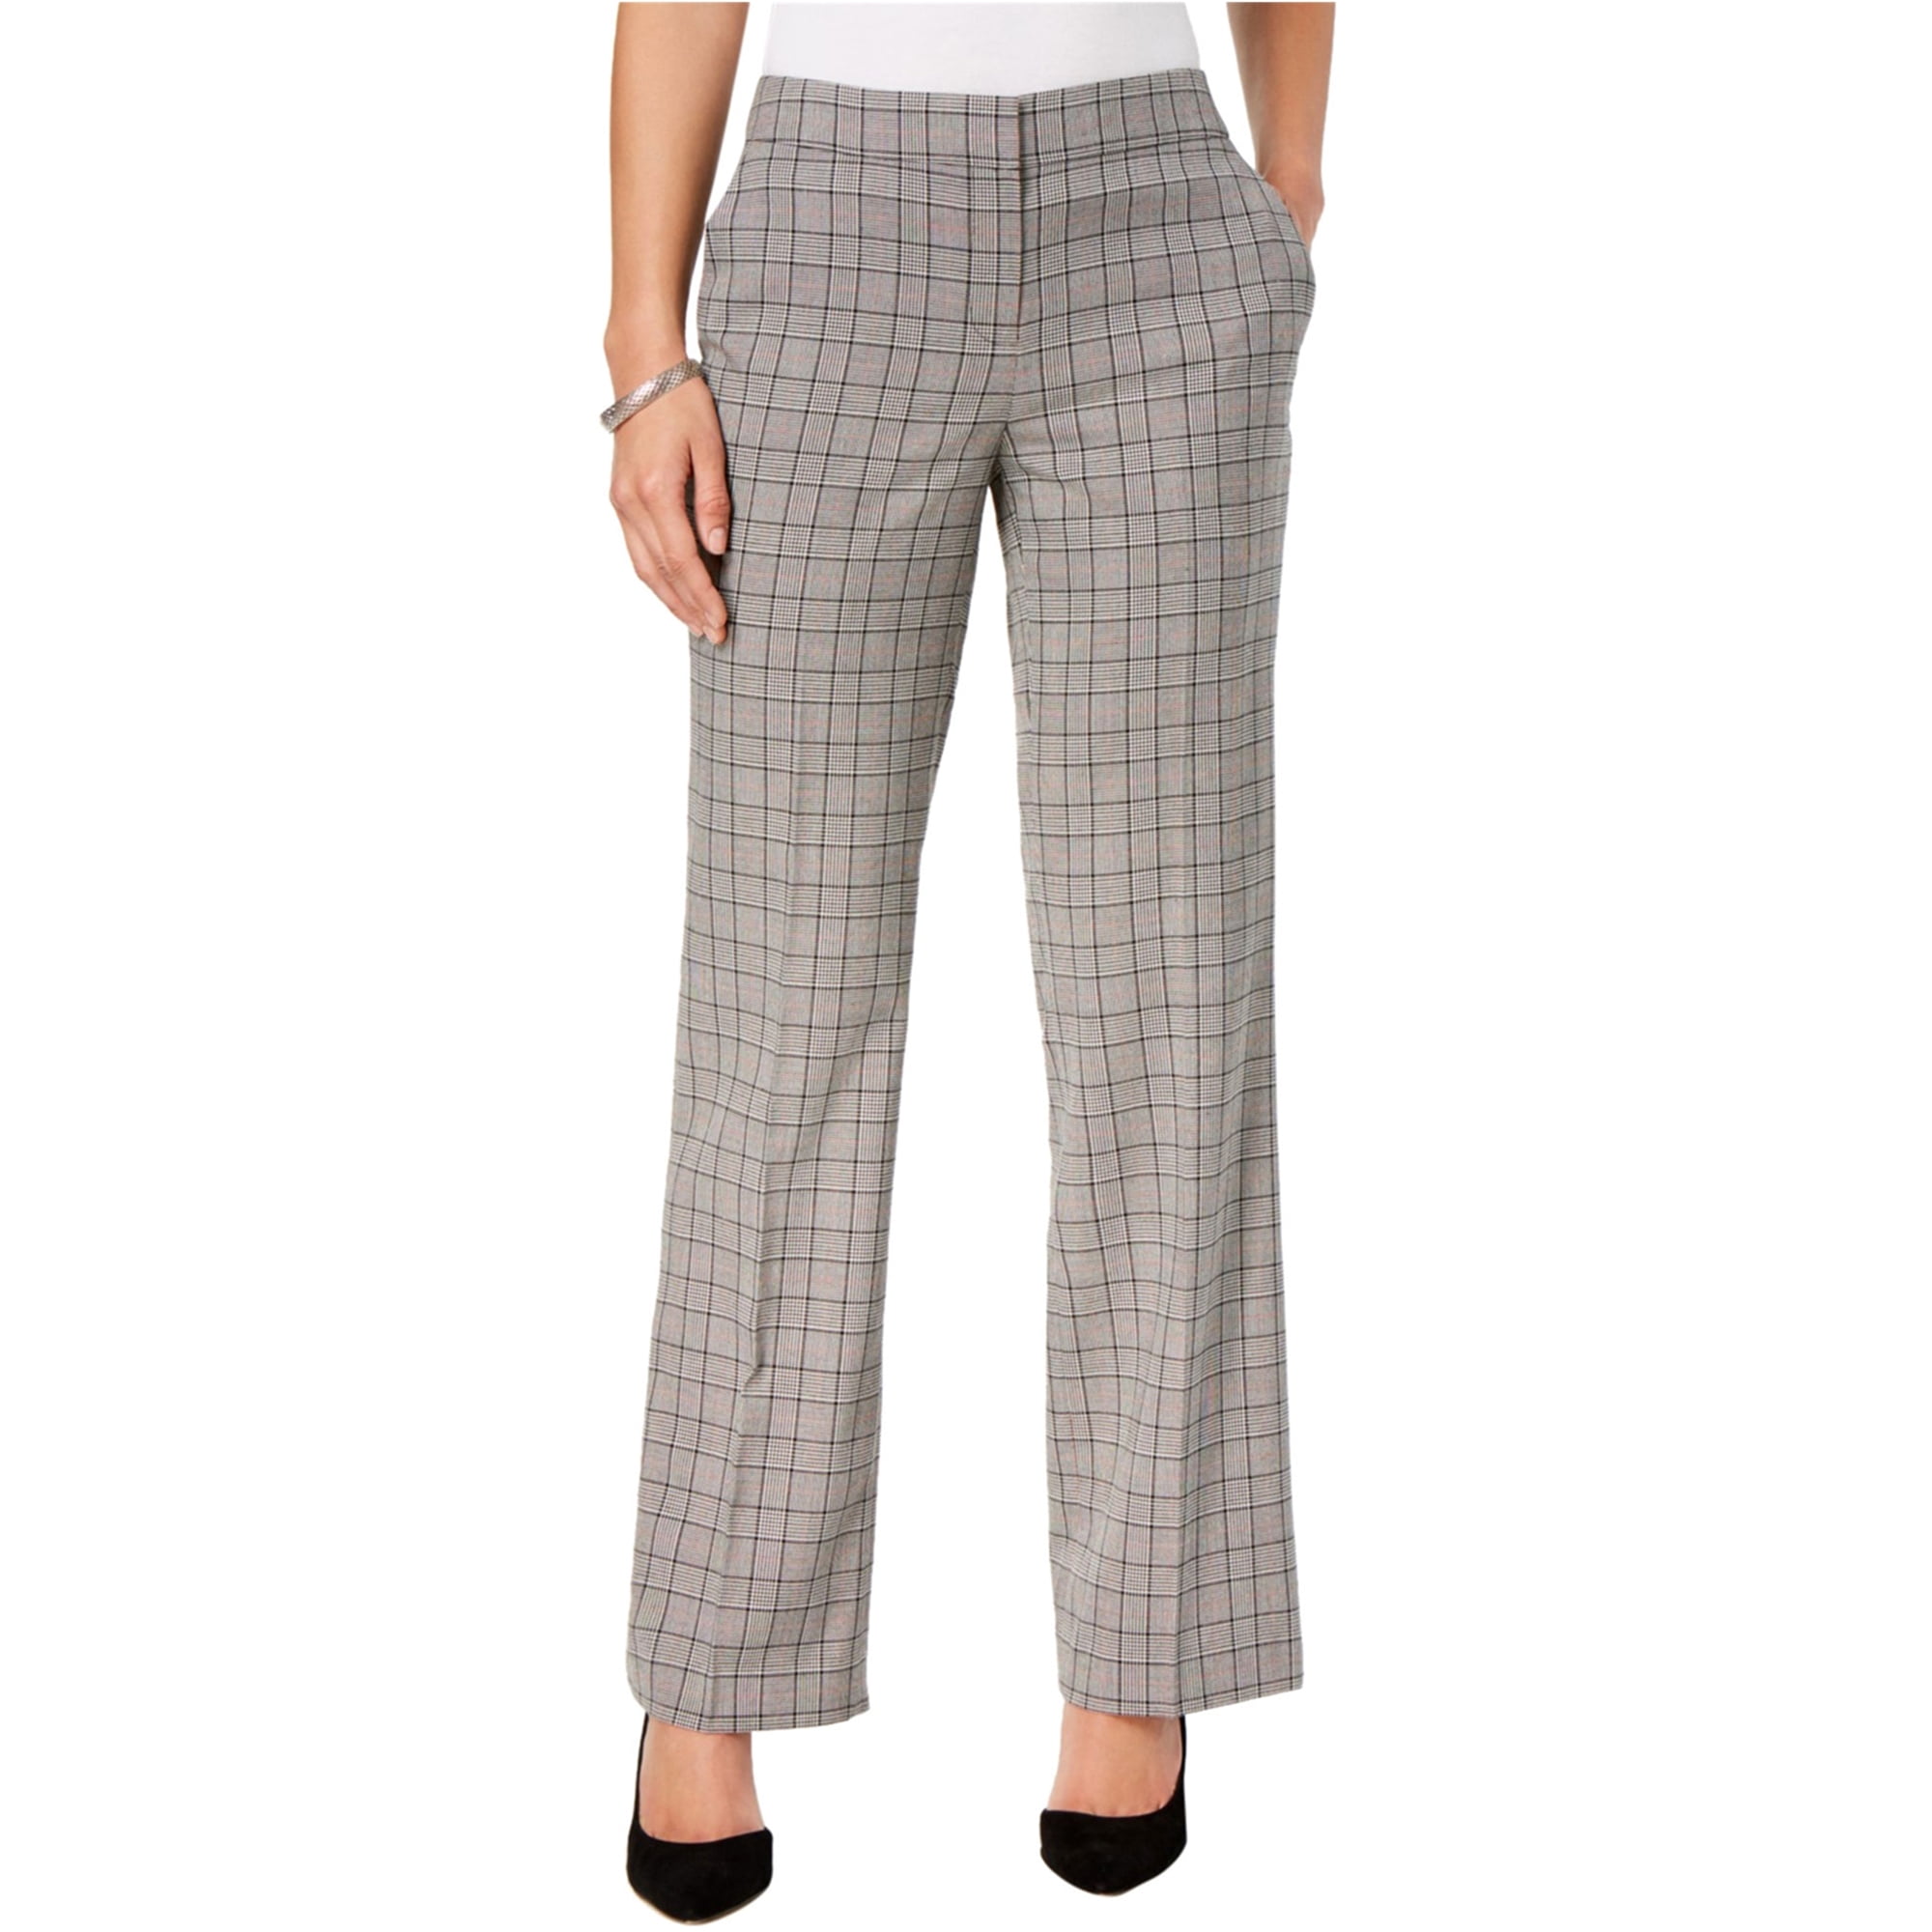 Buy AND Grey Womens Straight Fit 2 Pocket Check Pants | Shoppers Stop